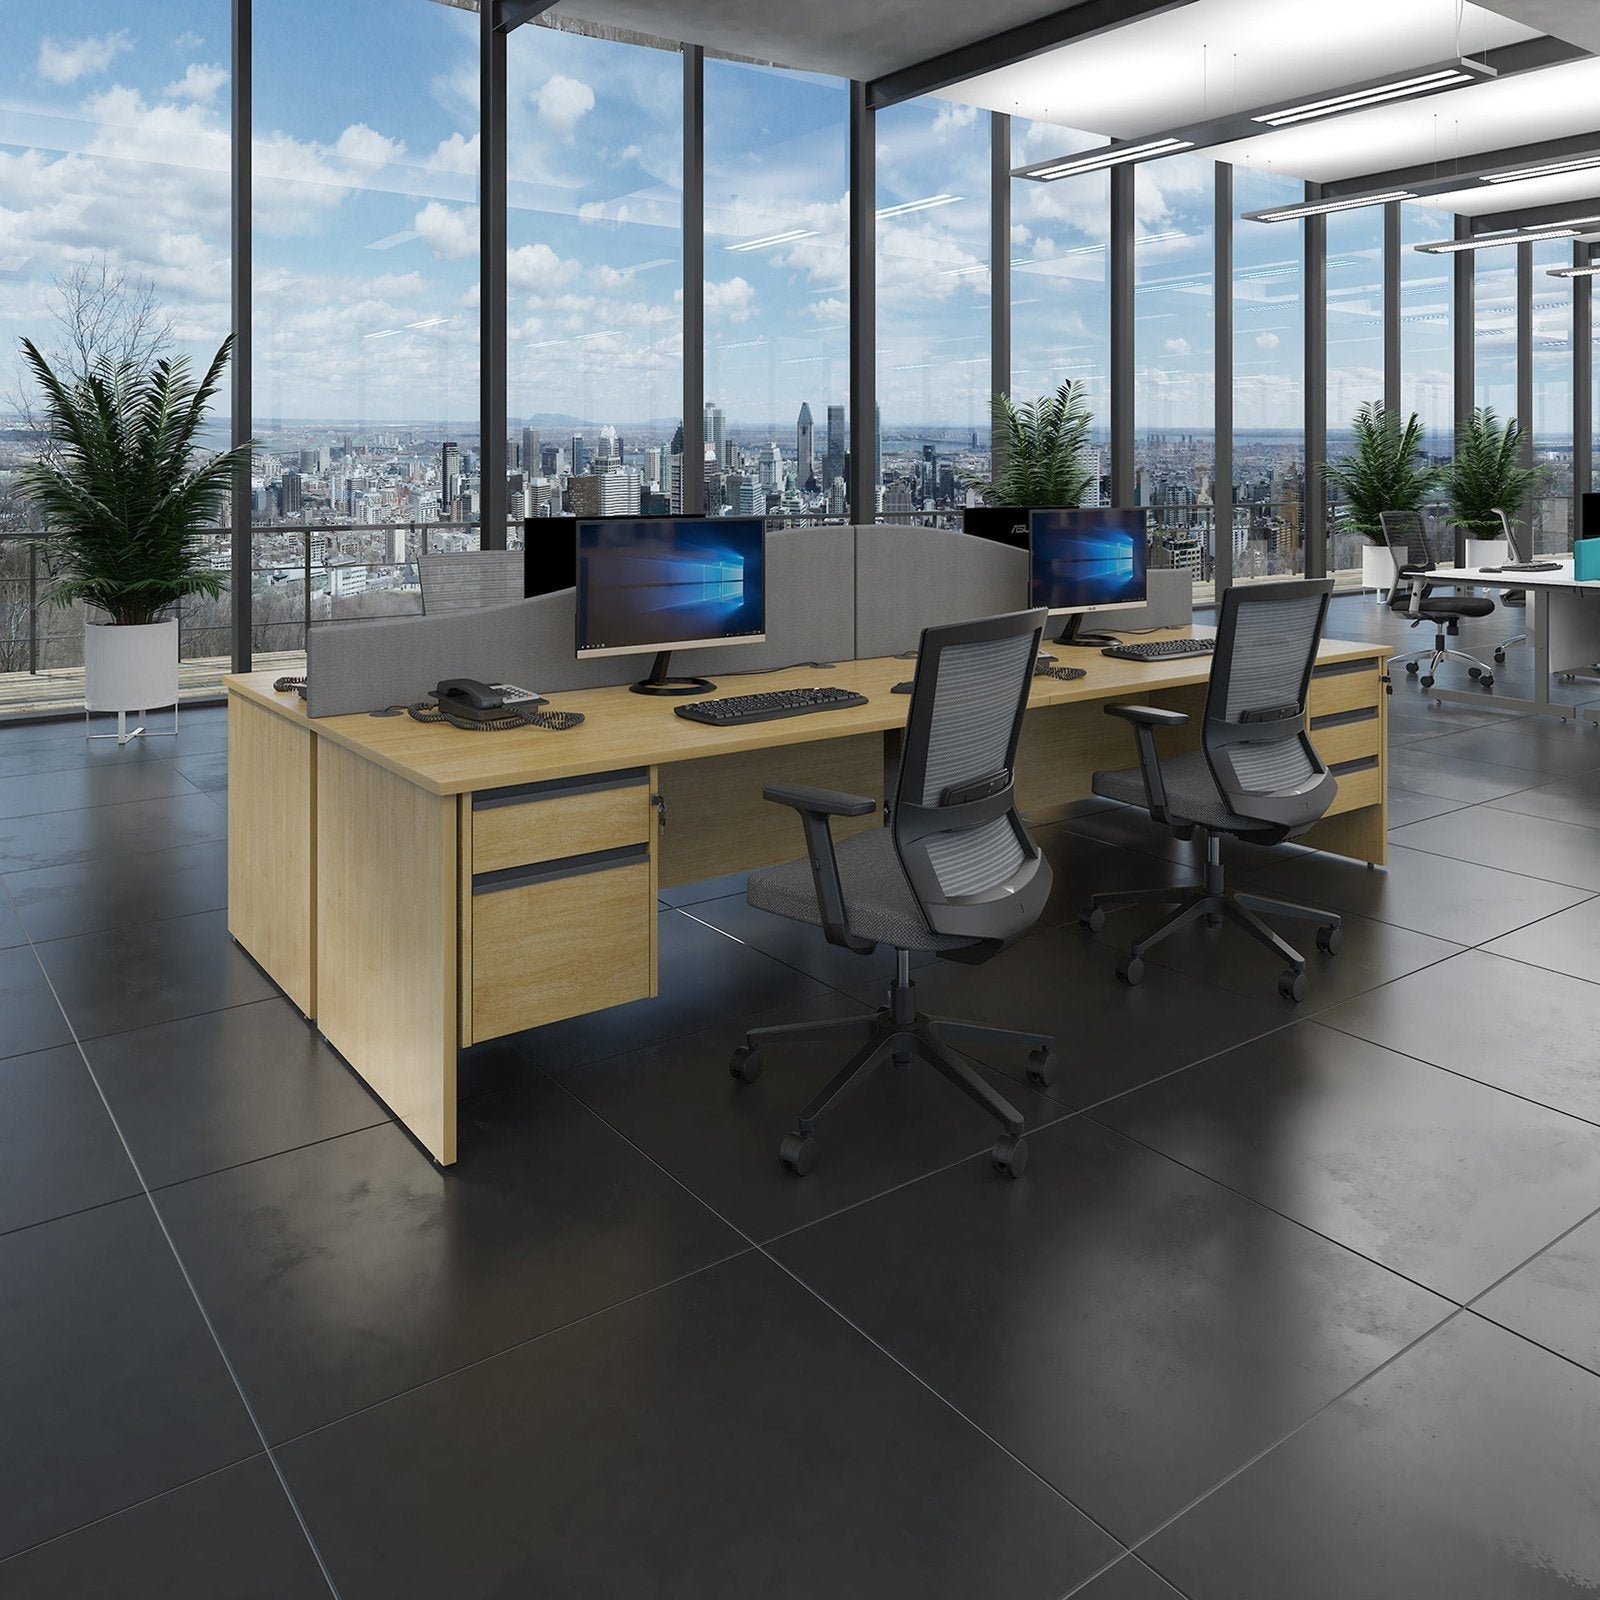 Contract 25 left hand ergonomic desk with 2 drawer pedestal and panel leg - Office Products Online